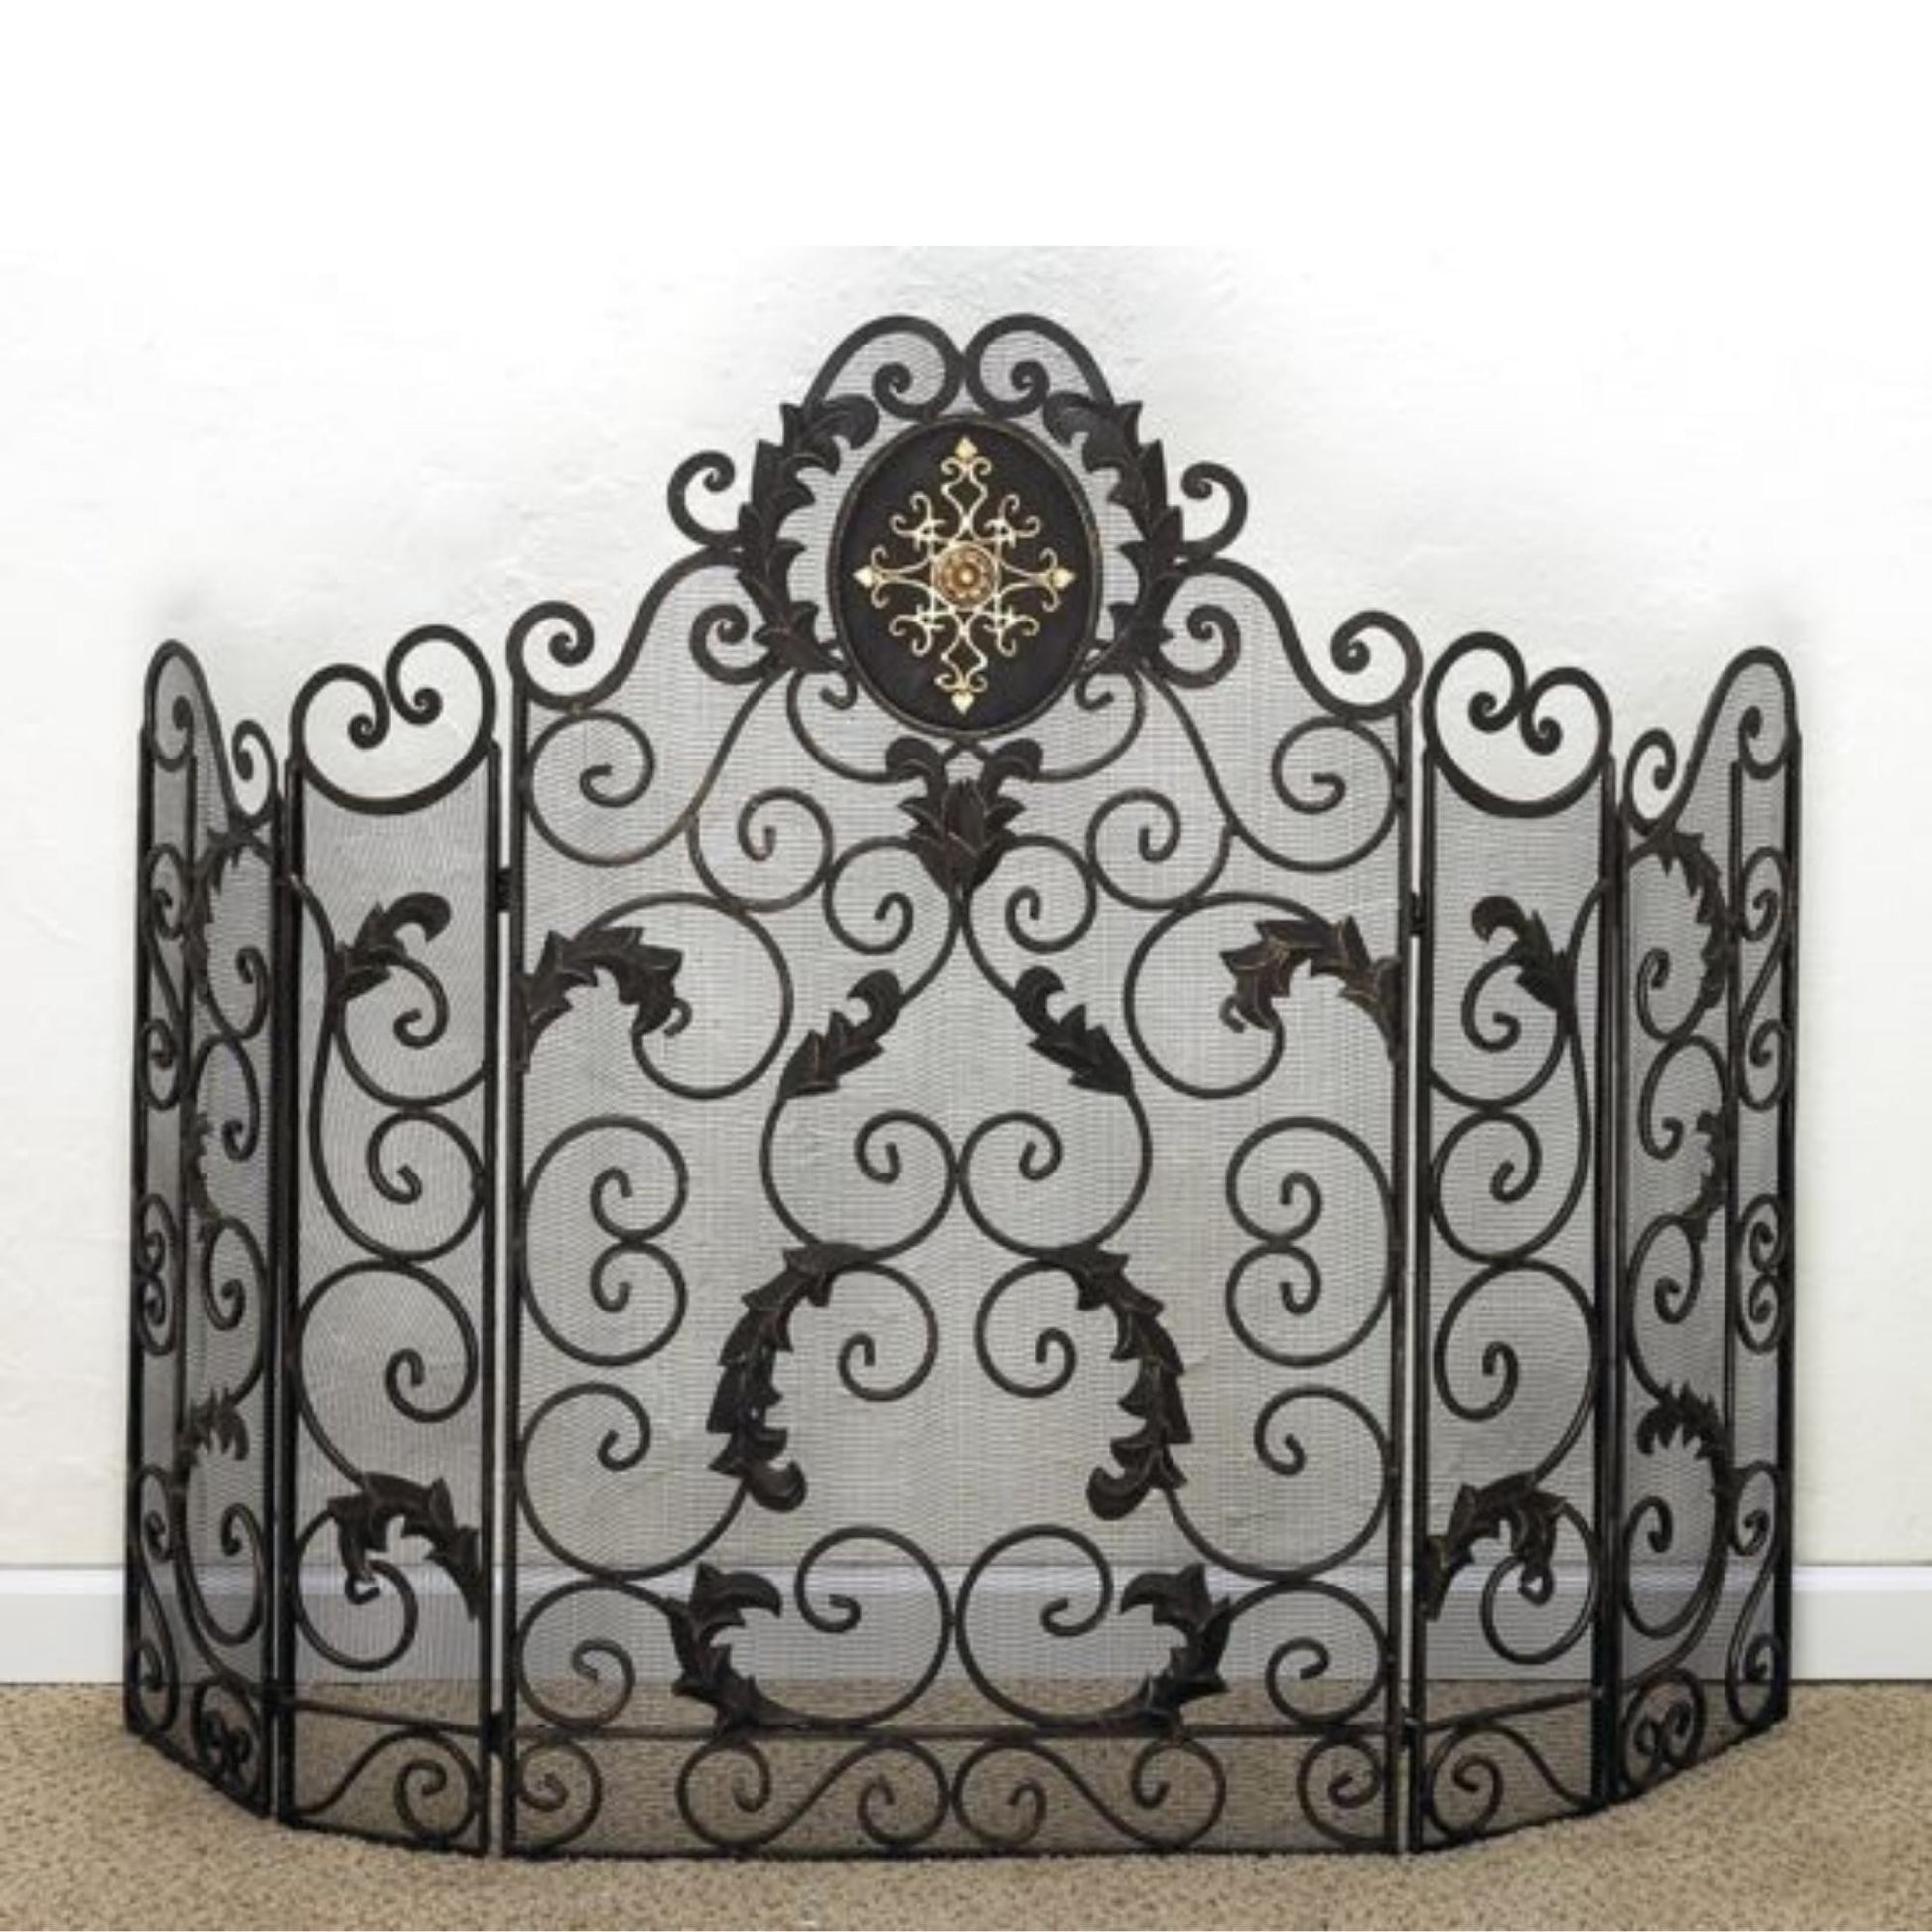 Monogrammed Iron Fire Screen - Five Panel Fireplace Screen with Mesh Backing | INSIDE OUT | InsideOutCatalog.com